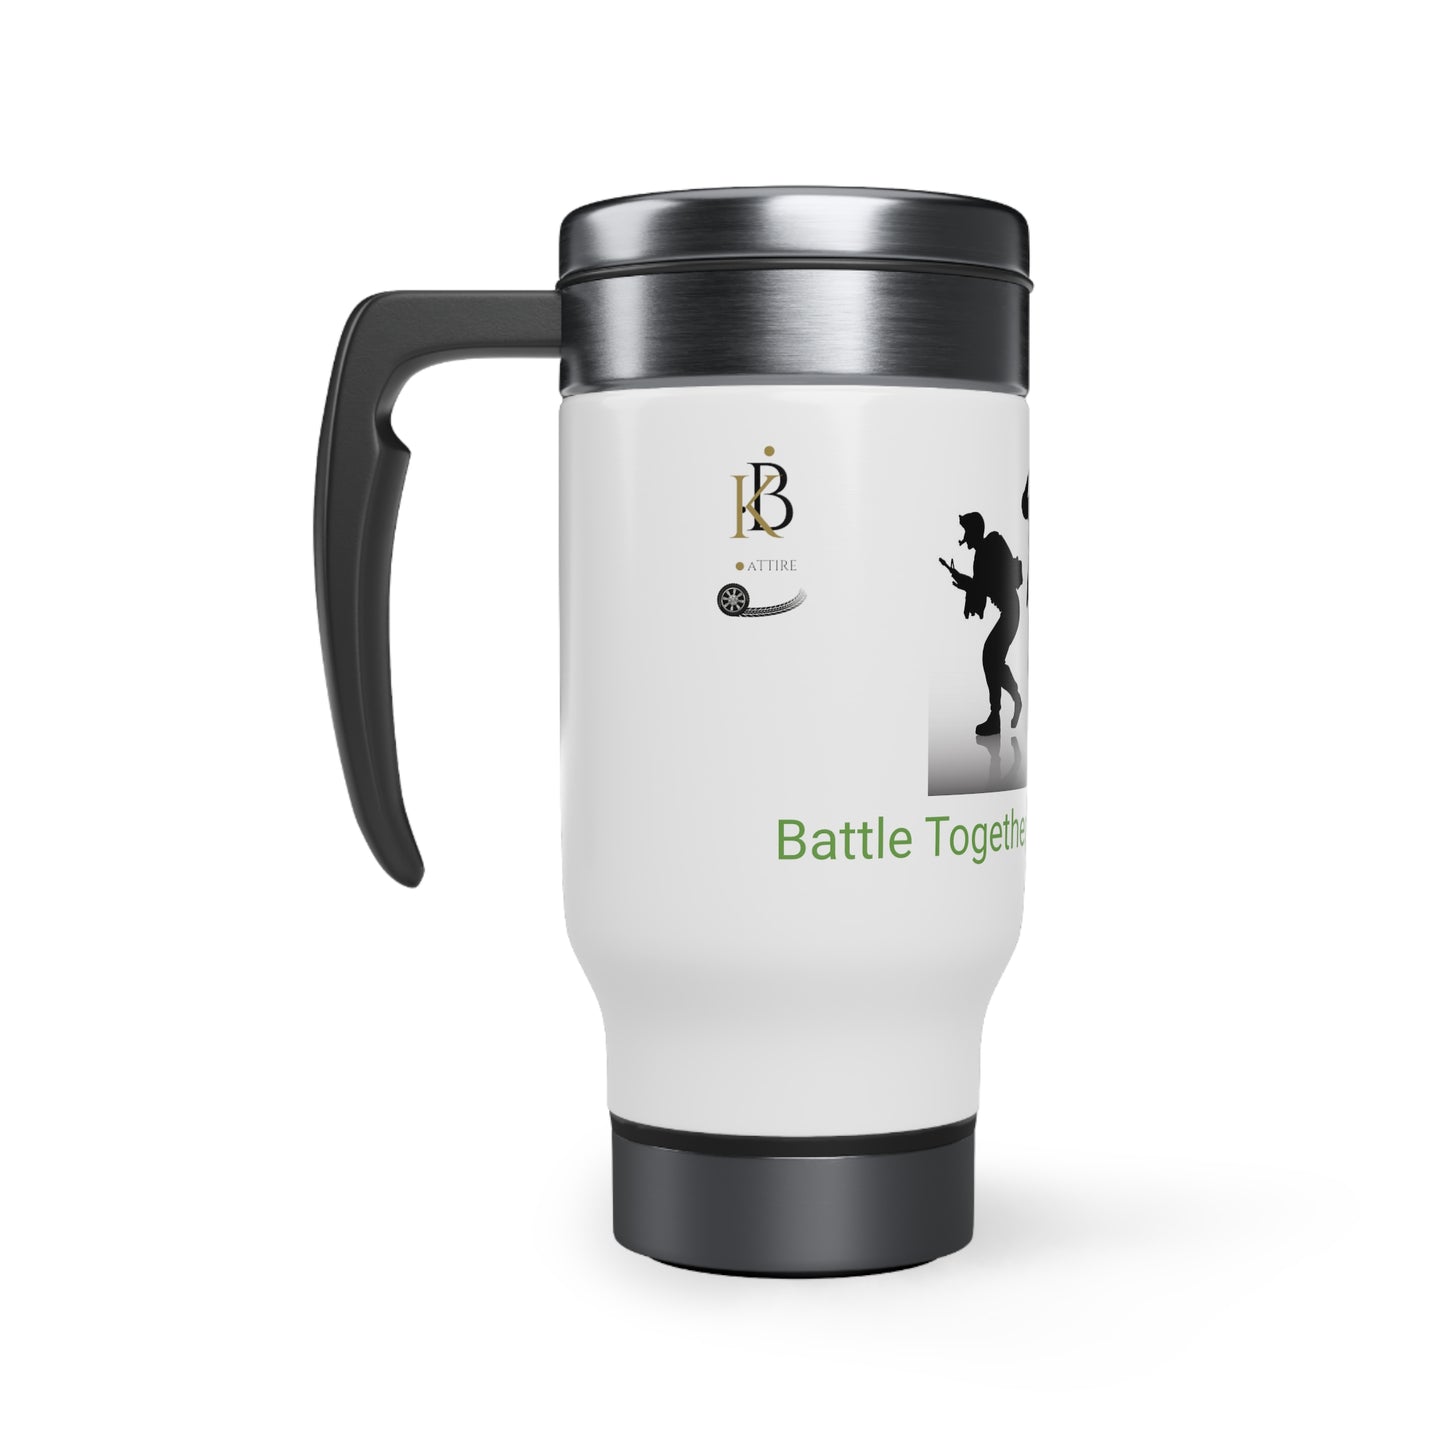 Custom KB Attire "Battle Together, Brothers in Arms" Stainless Steel Travel Mug with Handle, 14oz